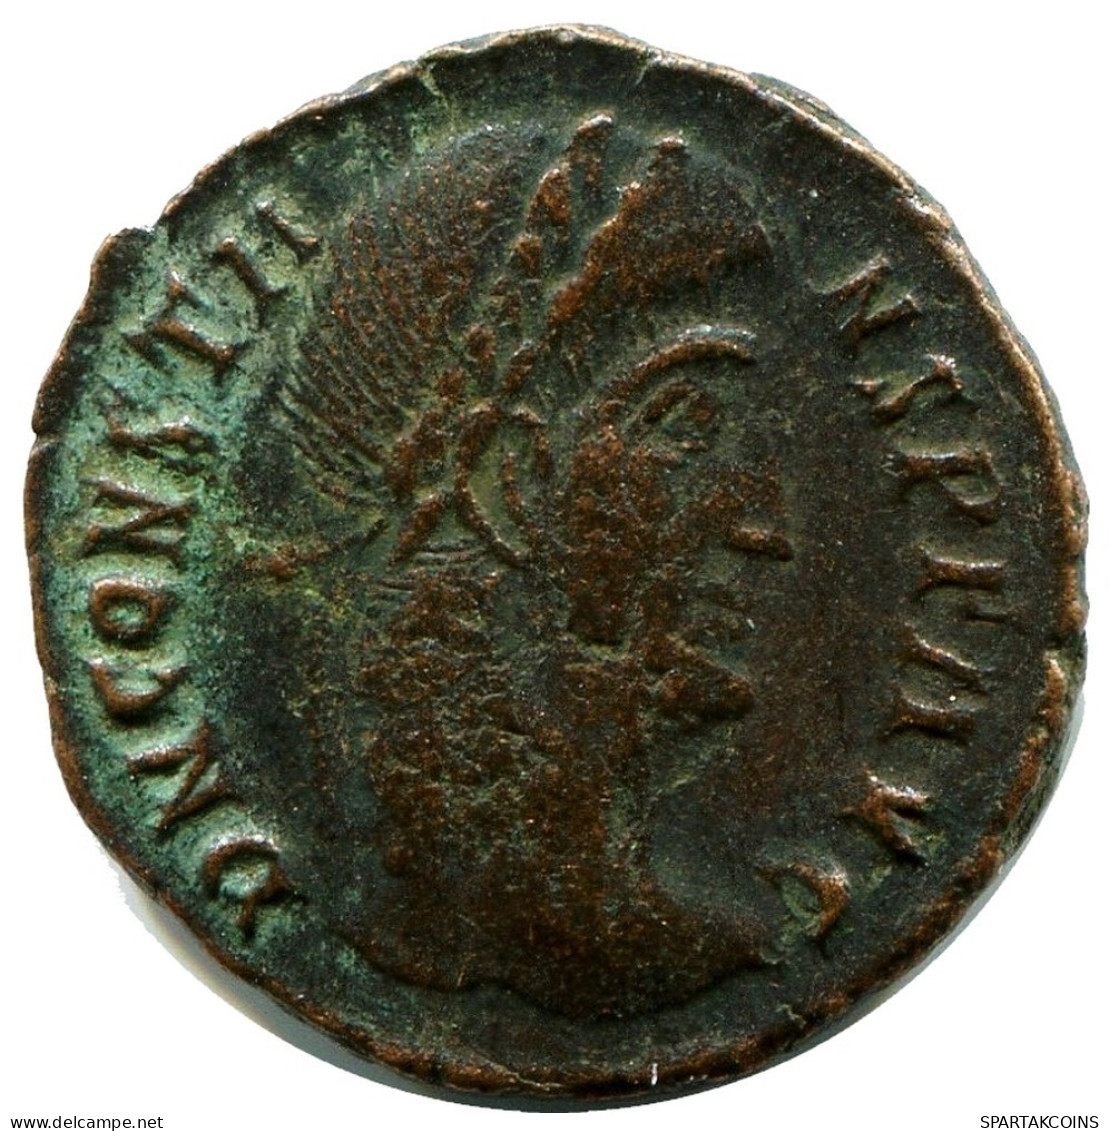 CONSTANS MINTED IN CYZICUS FROM THE ROYAL ONTARIO MUSEUM #ANC11595.14.D.A - L'Empire Chrétien (307 à 363)